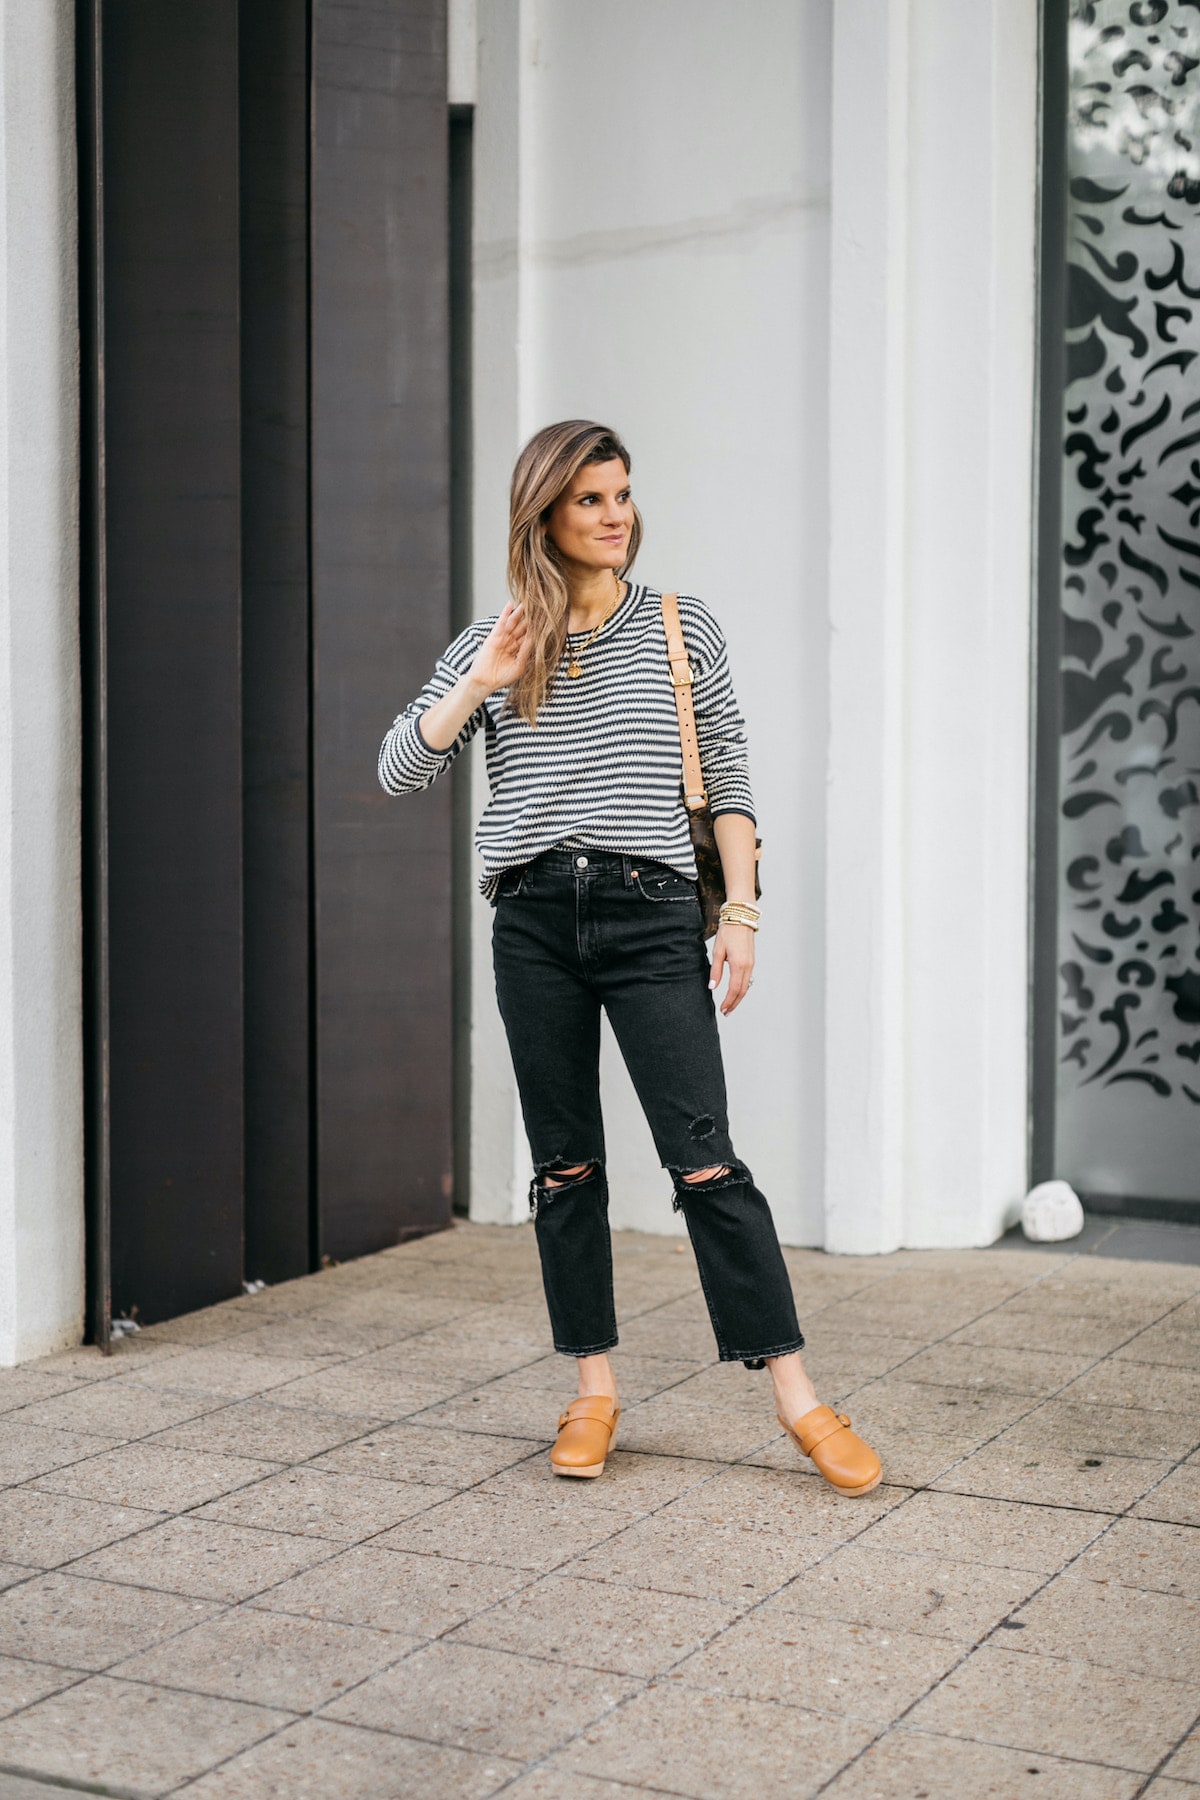 Brighton Butler wearing striped madewell sweater with black jeans, clogs and LV bumbag